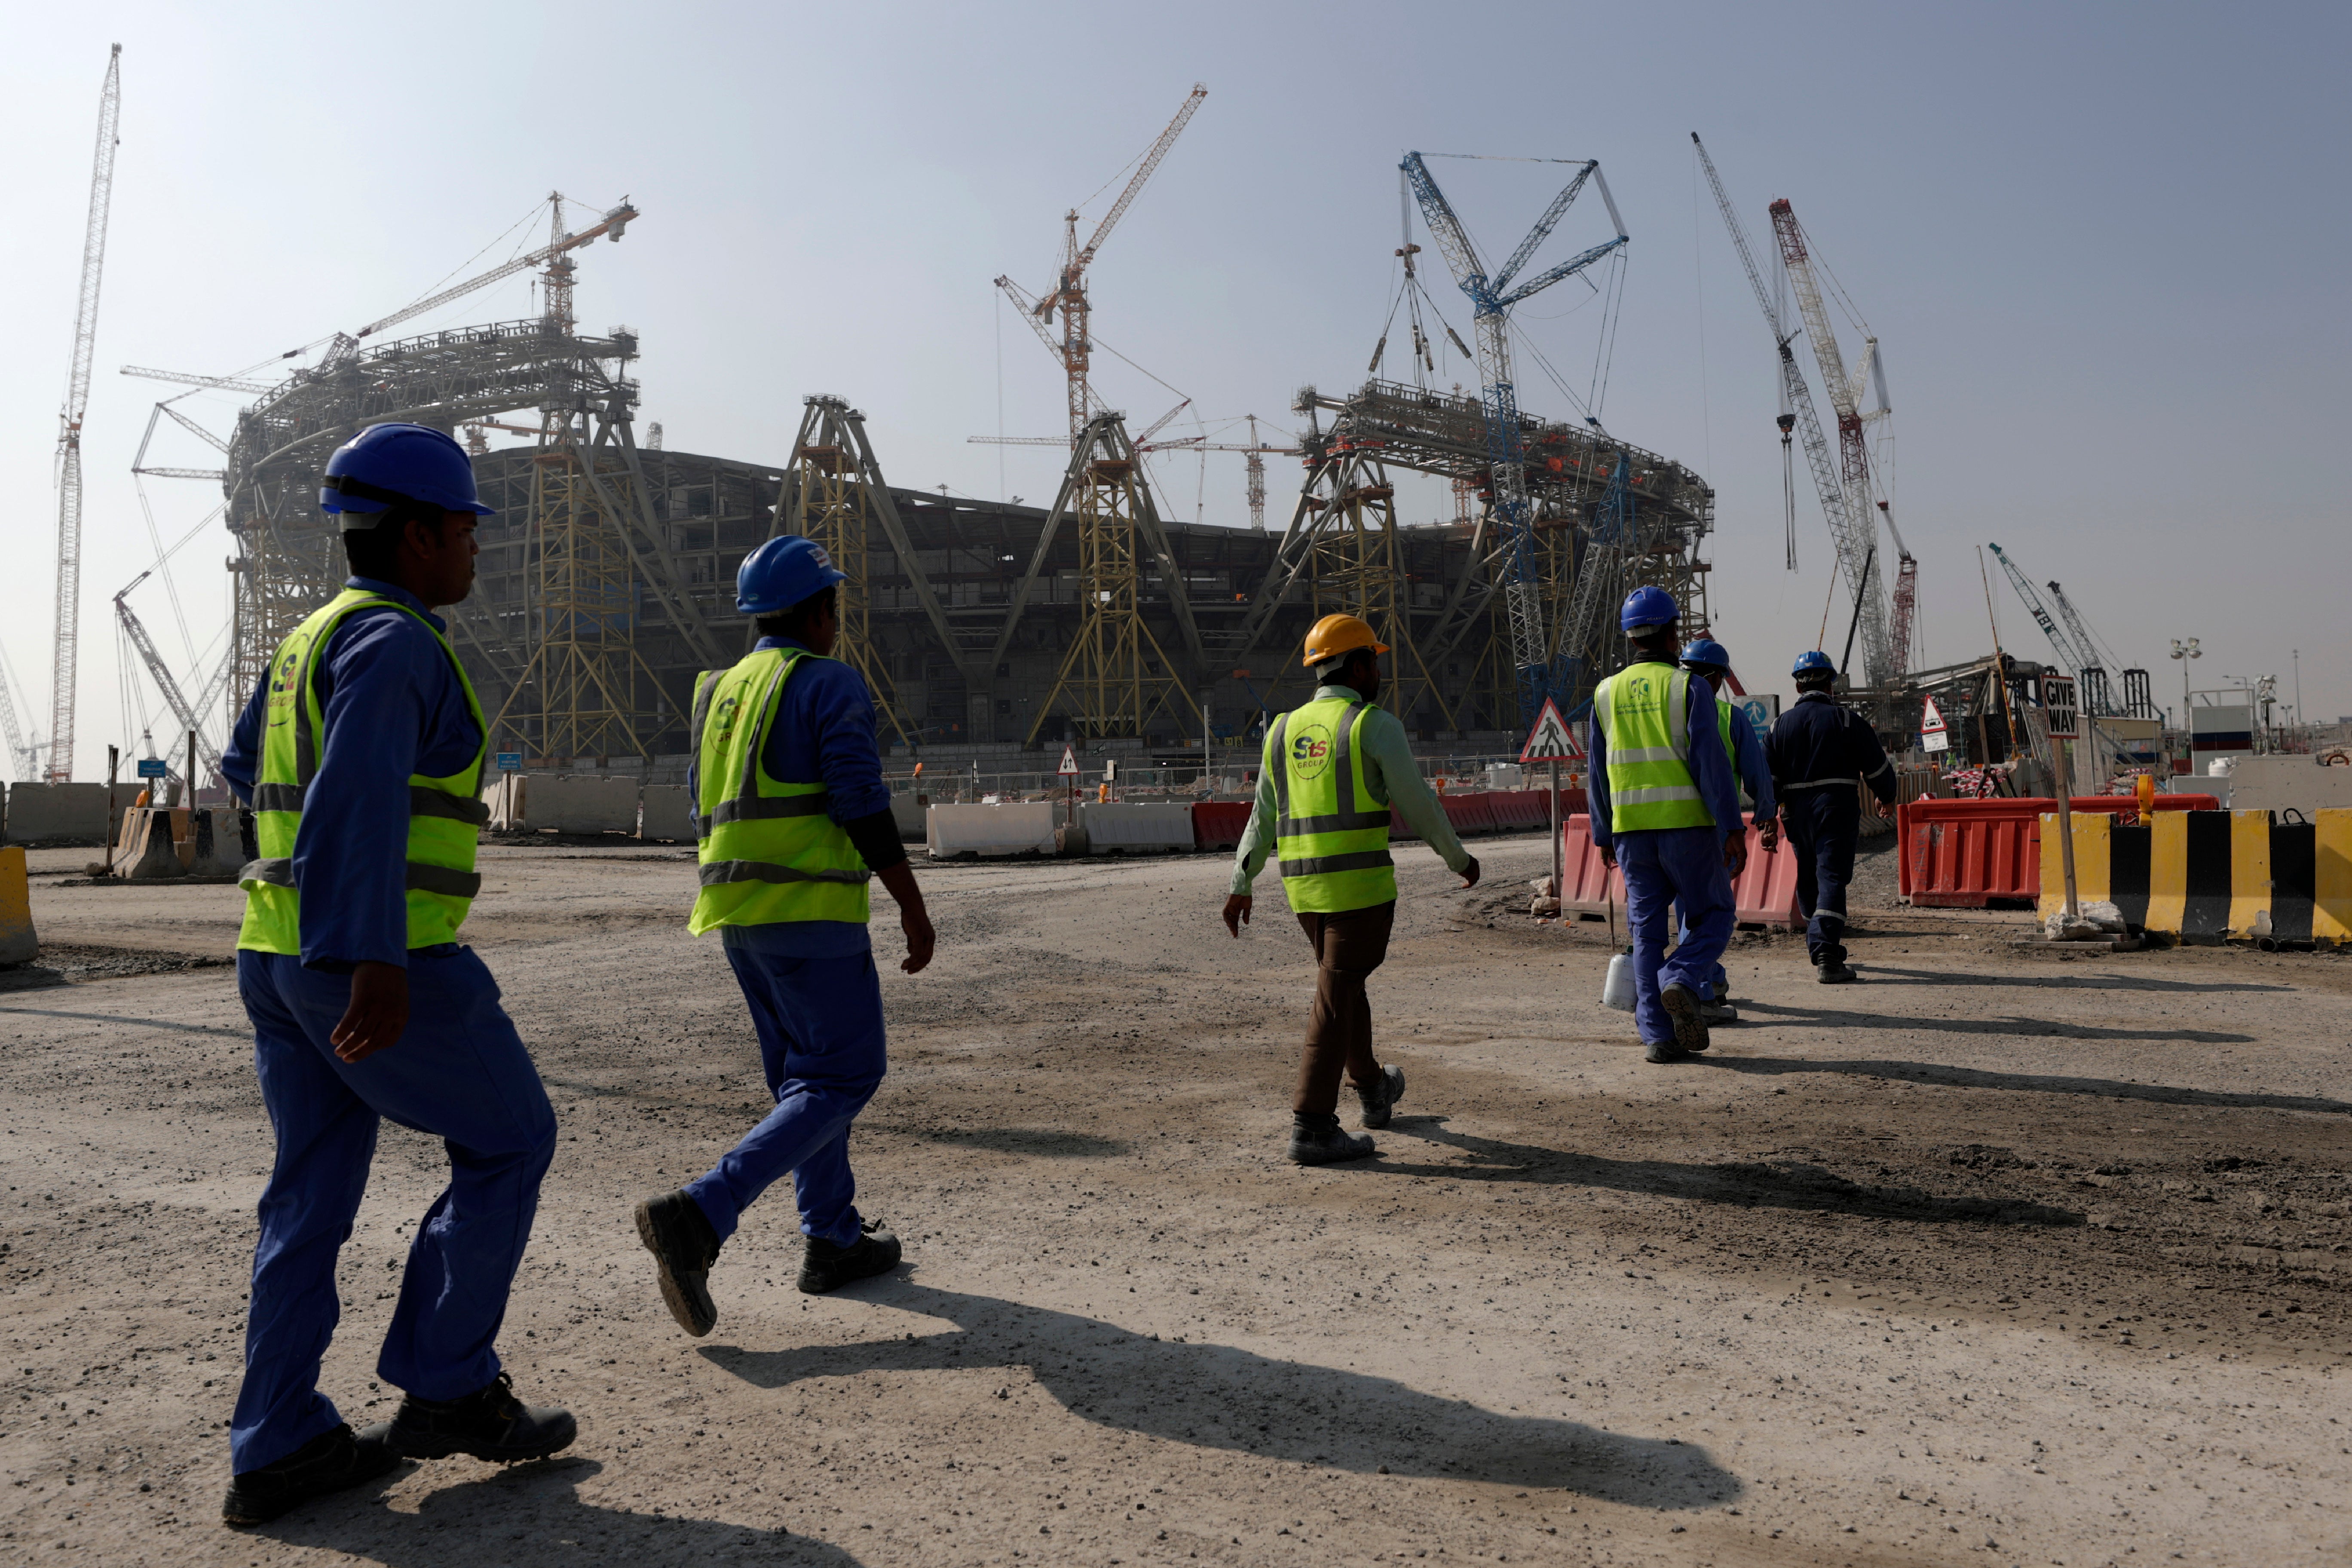 The labour of migrant workers in mostly searing heat was essential to prepare Qatar’s stadiums, transport routes and hotels for the month-long tournament